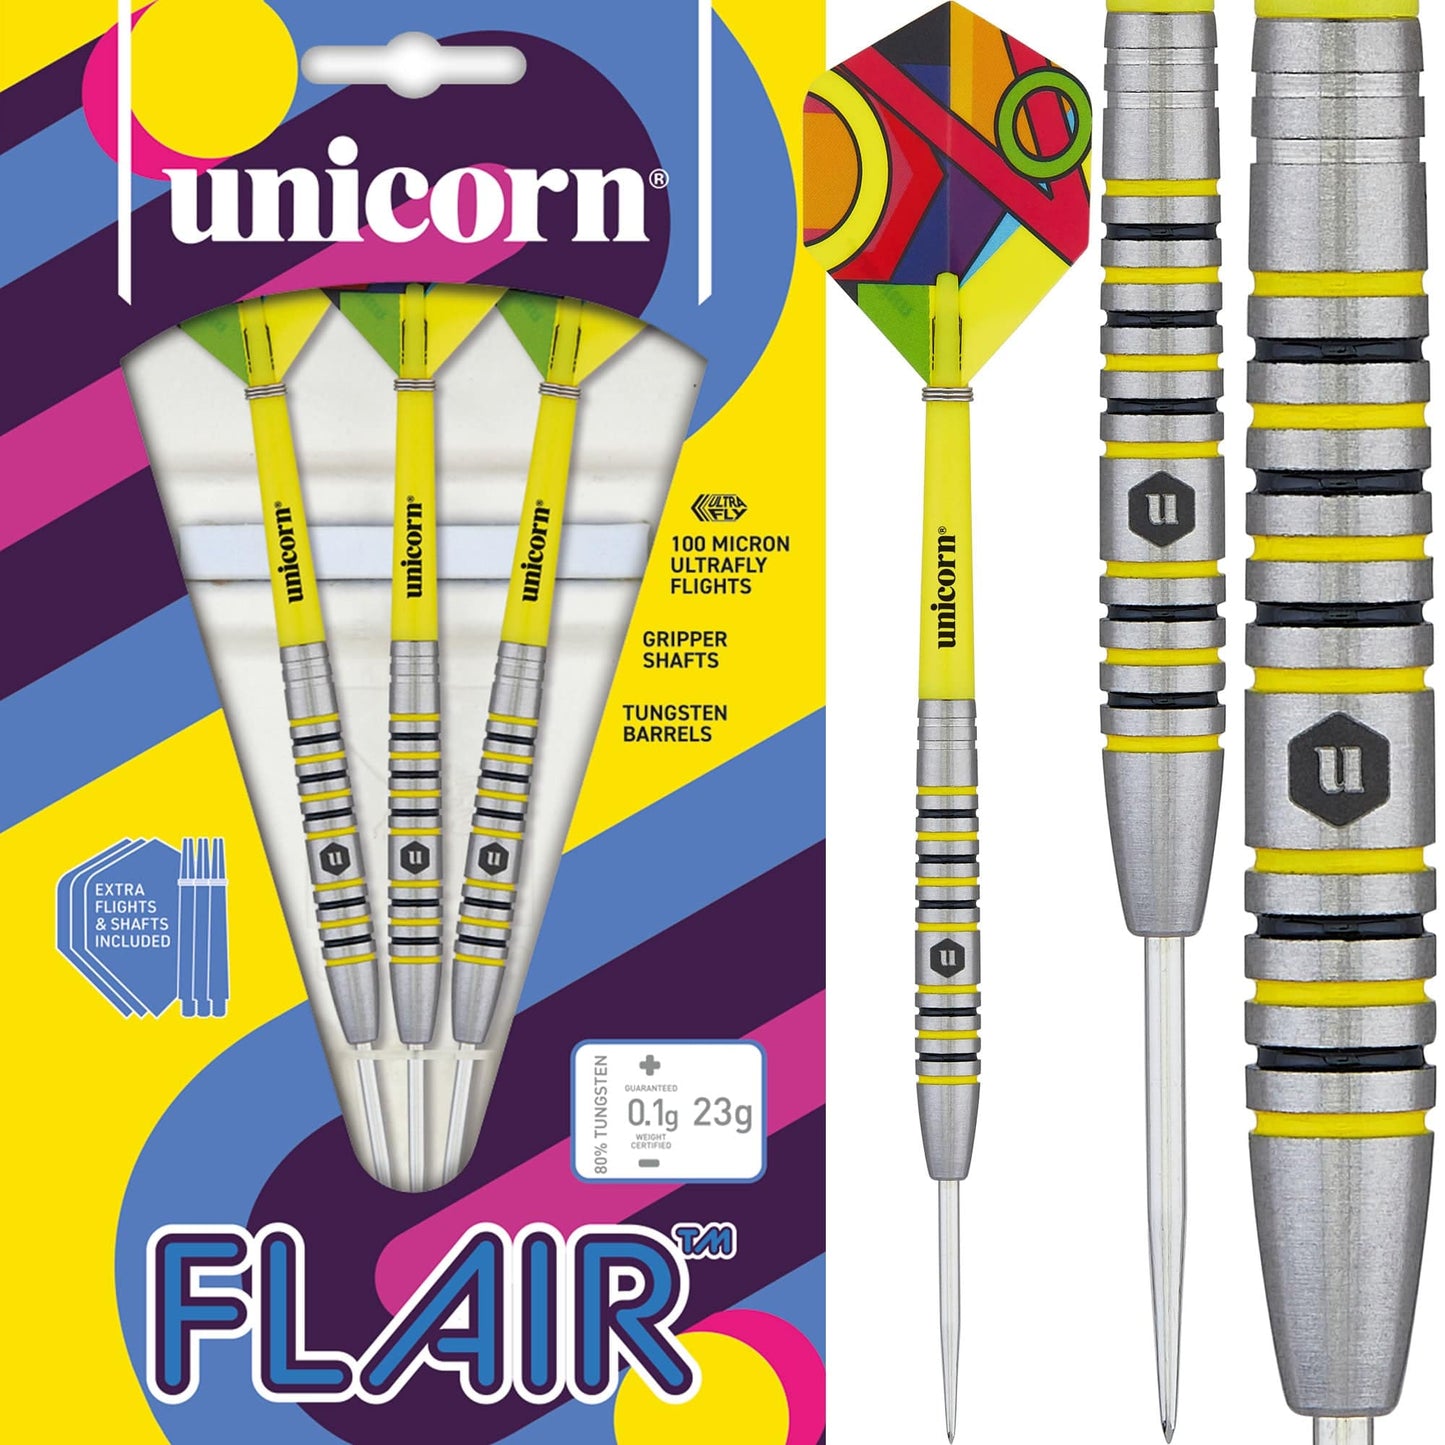 Unicorn Flair Darts - Steel Tip - Style 4 - Colour Ringed 23g